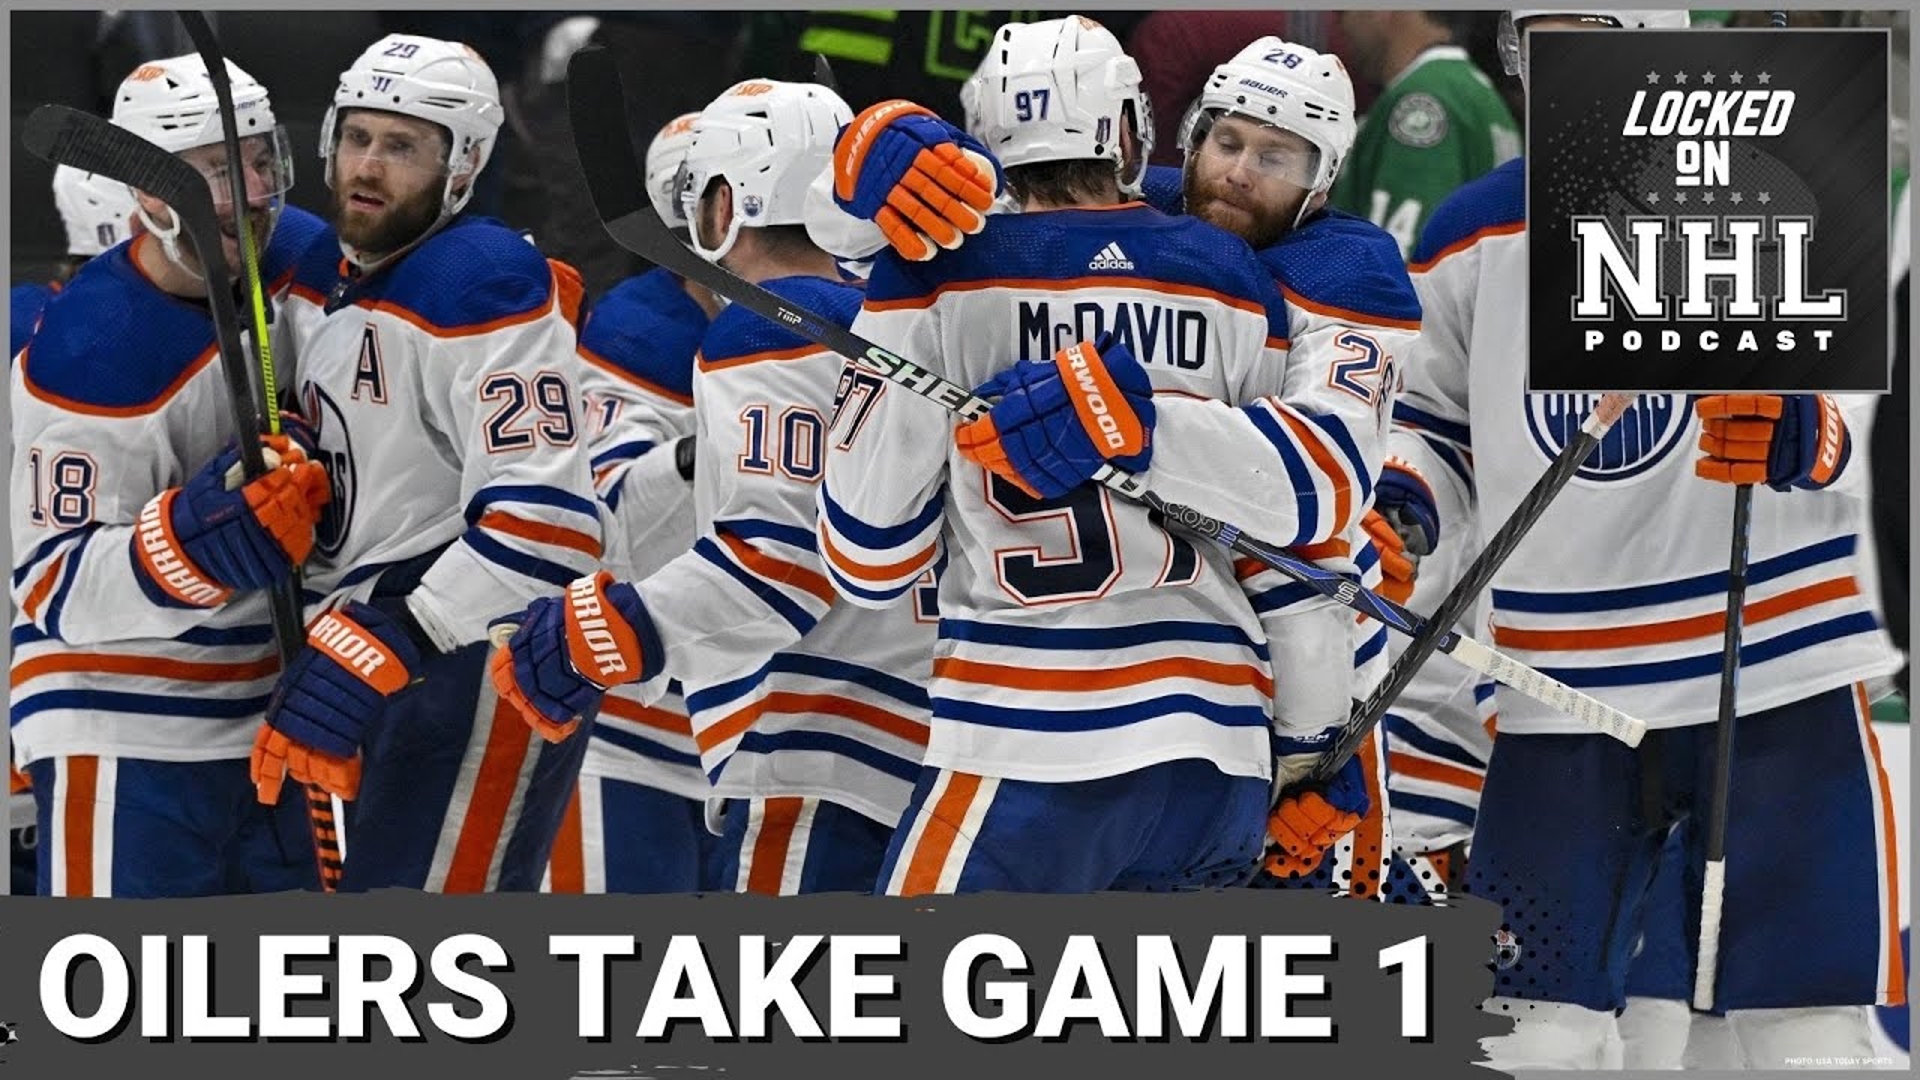 Connor McDavid scored the game winner in double overtime to give the Edmonton Oilers a 1-0 lead in their series with the Dallas Stars.